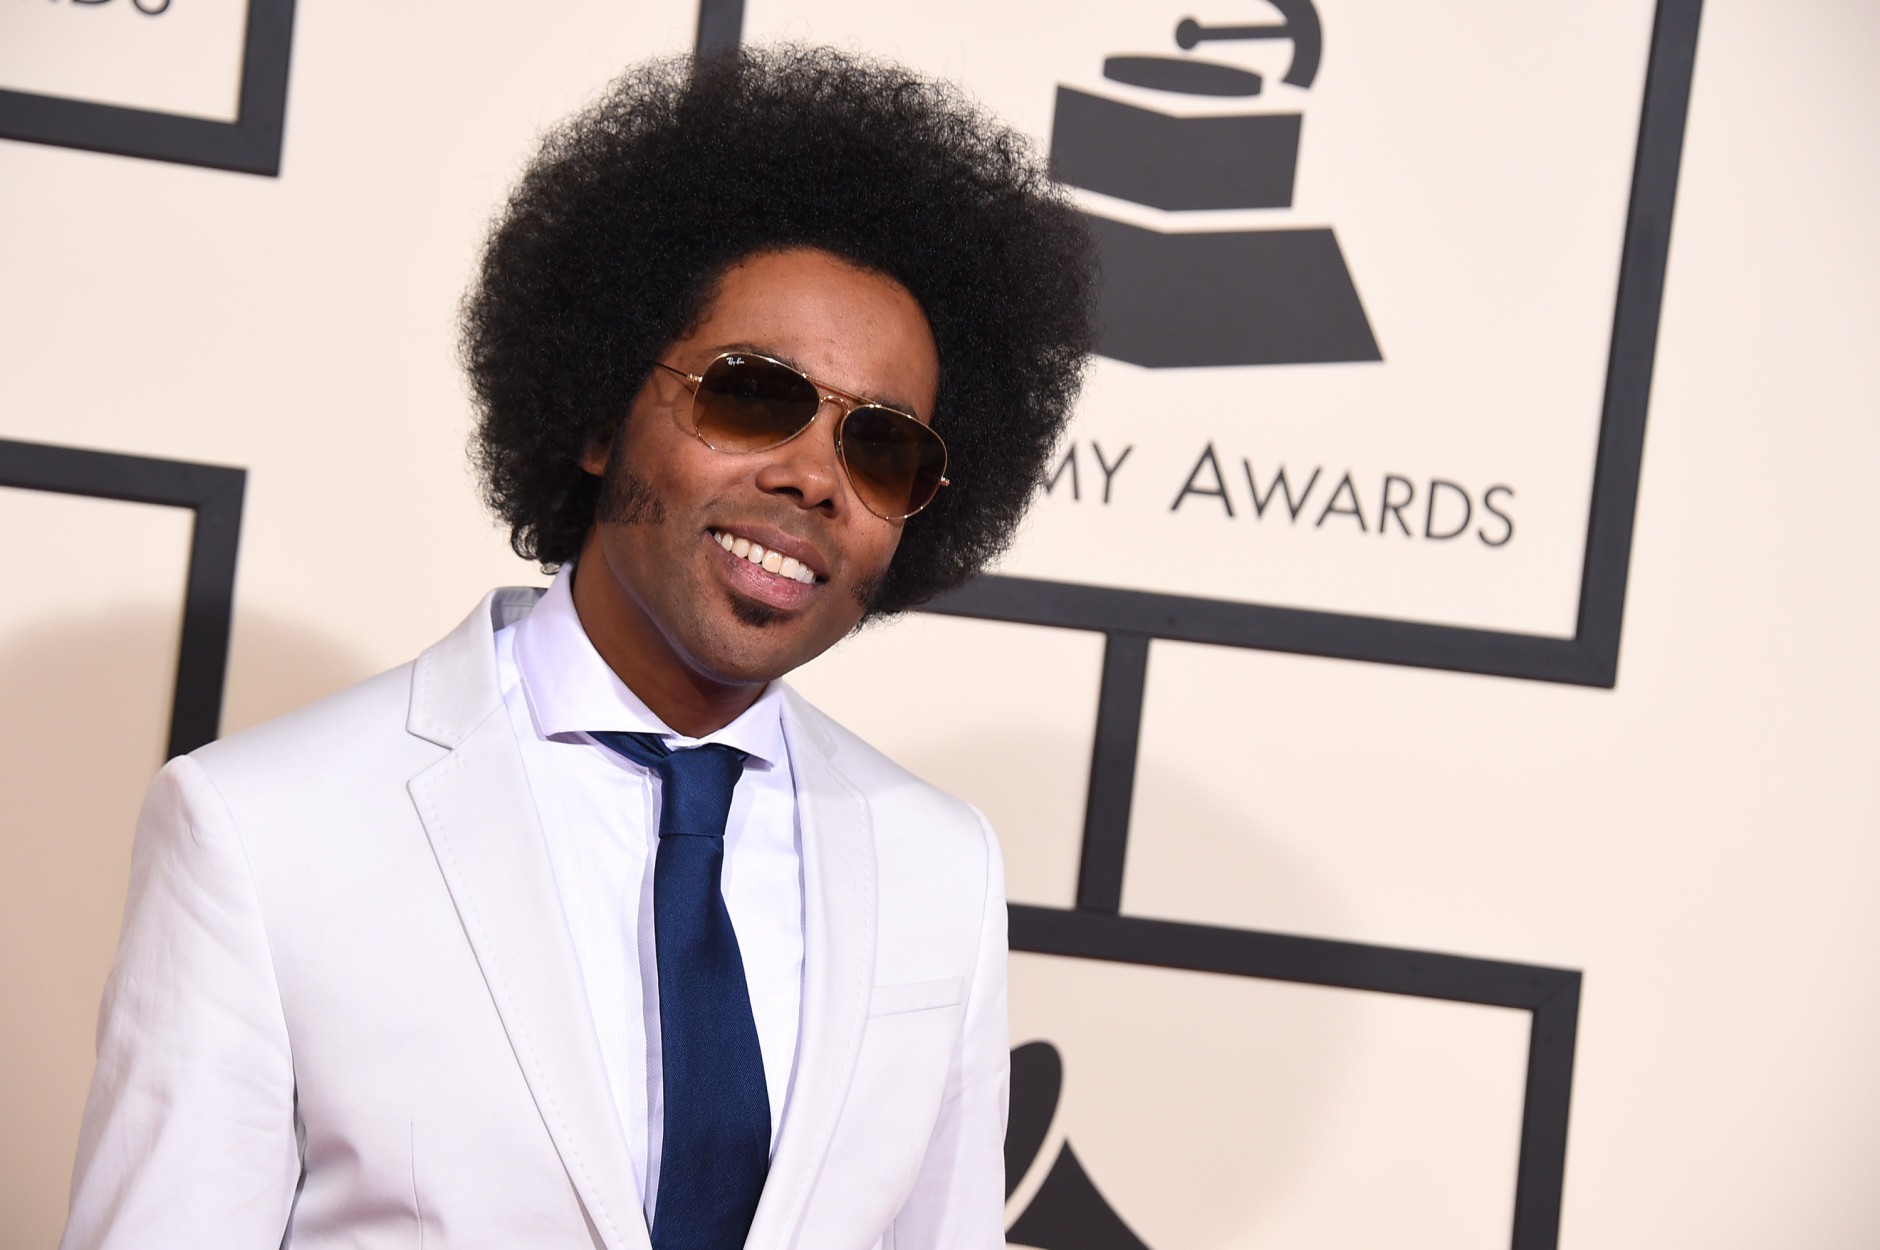 Alex Cuba arrives at the 58th annual Grammy Awards at the Staples Center on Monday, Feb. 15, 2016, in Los Angeles. (Photo by Jordan Strauss/Invision/AP)